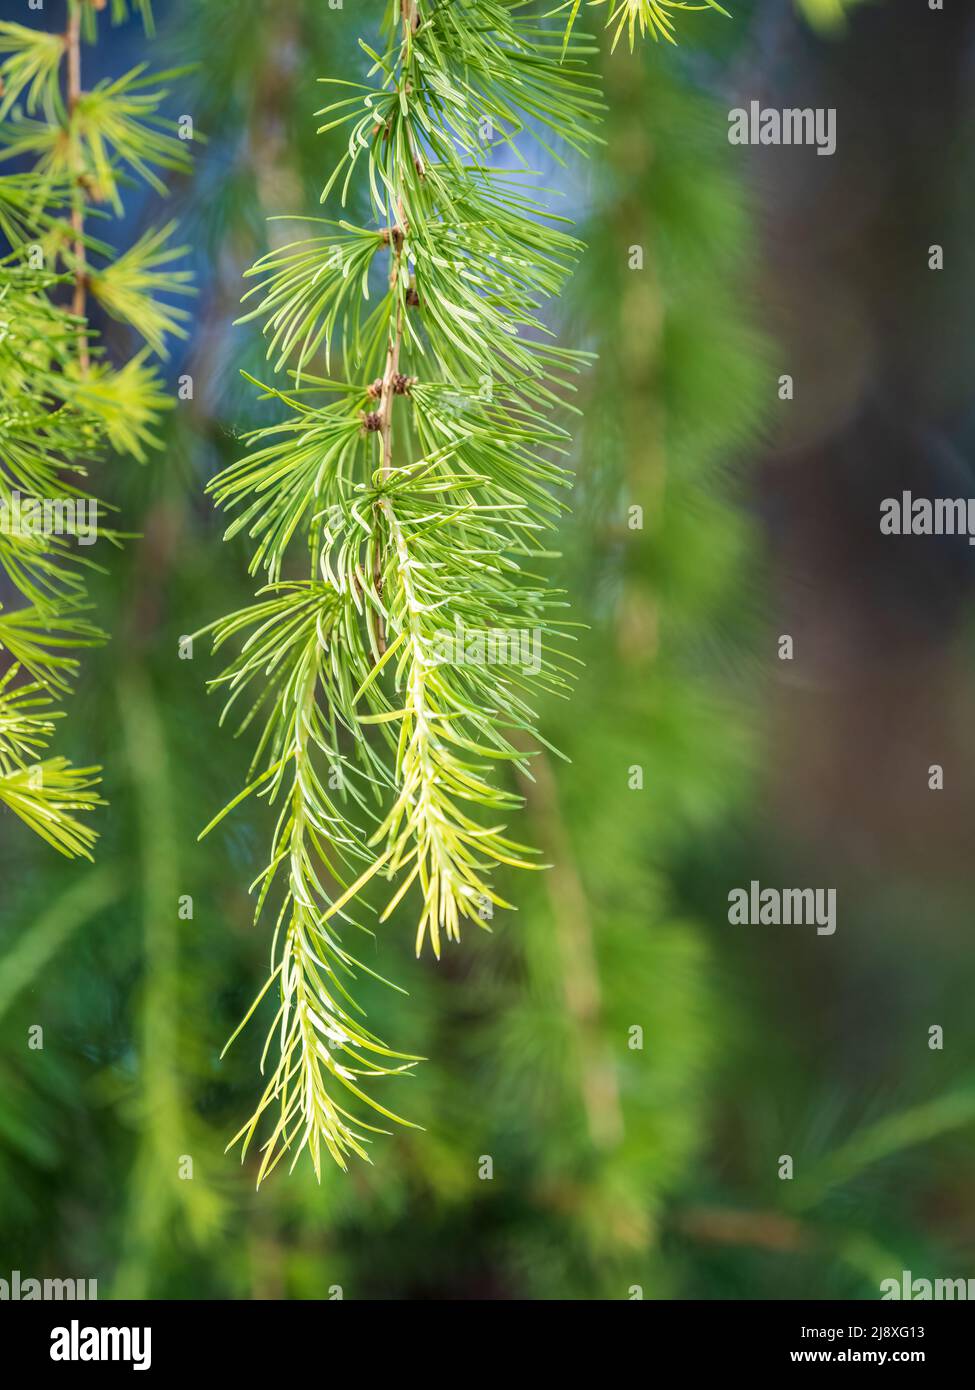 Young branches of larch. Closeup of green larch young needles. Larix sibirica, the Siberian larch or Russian larch. Stock Photo